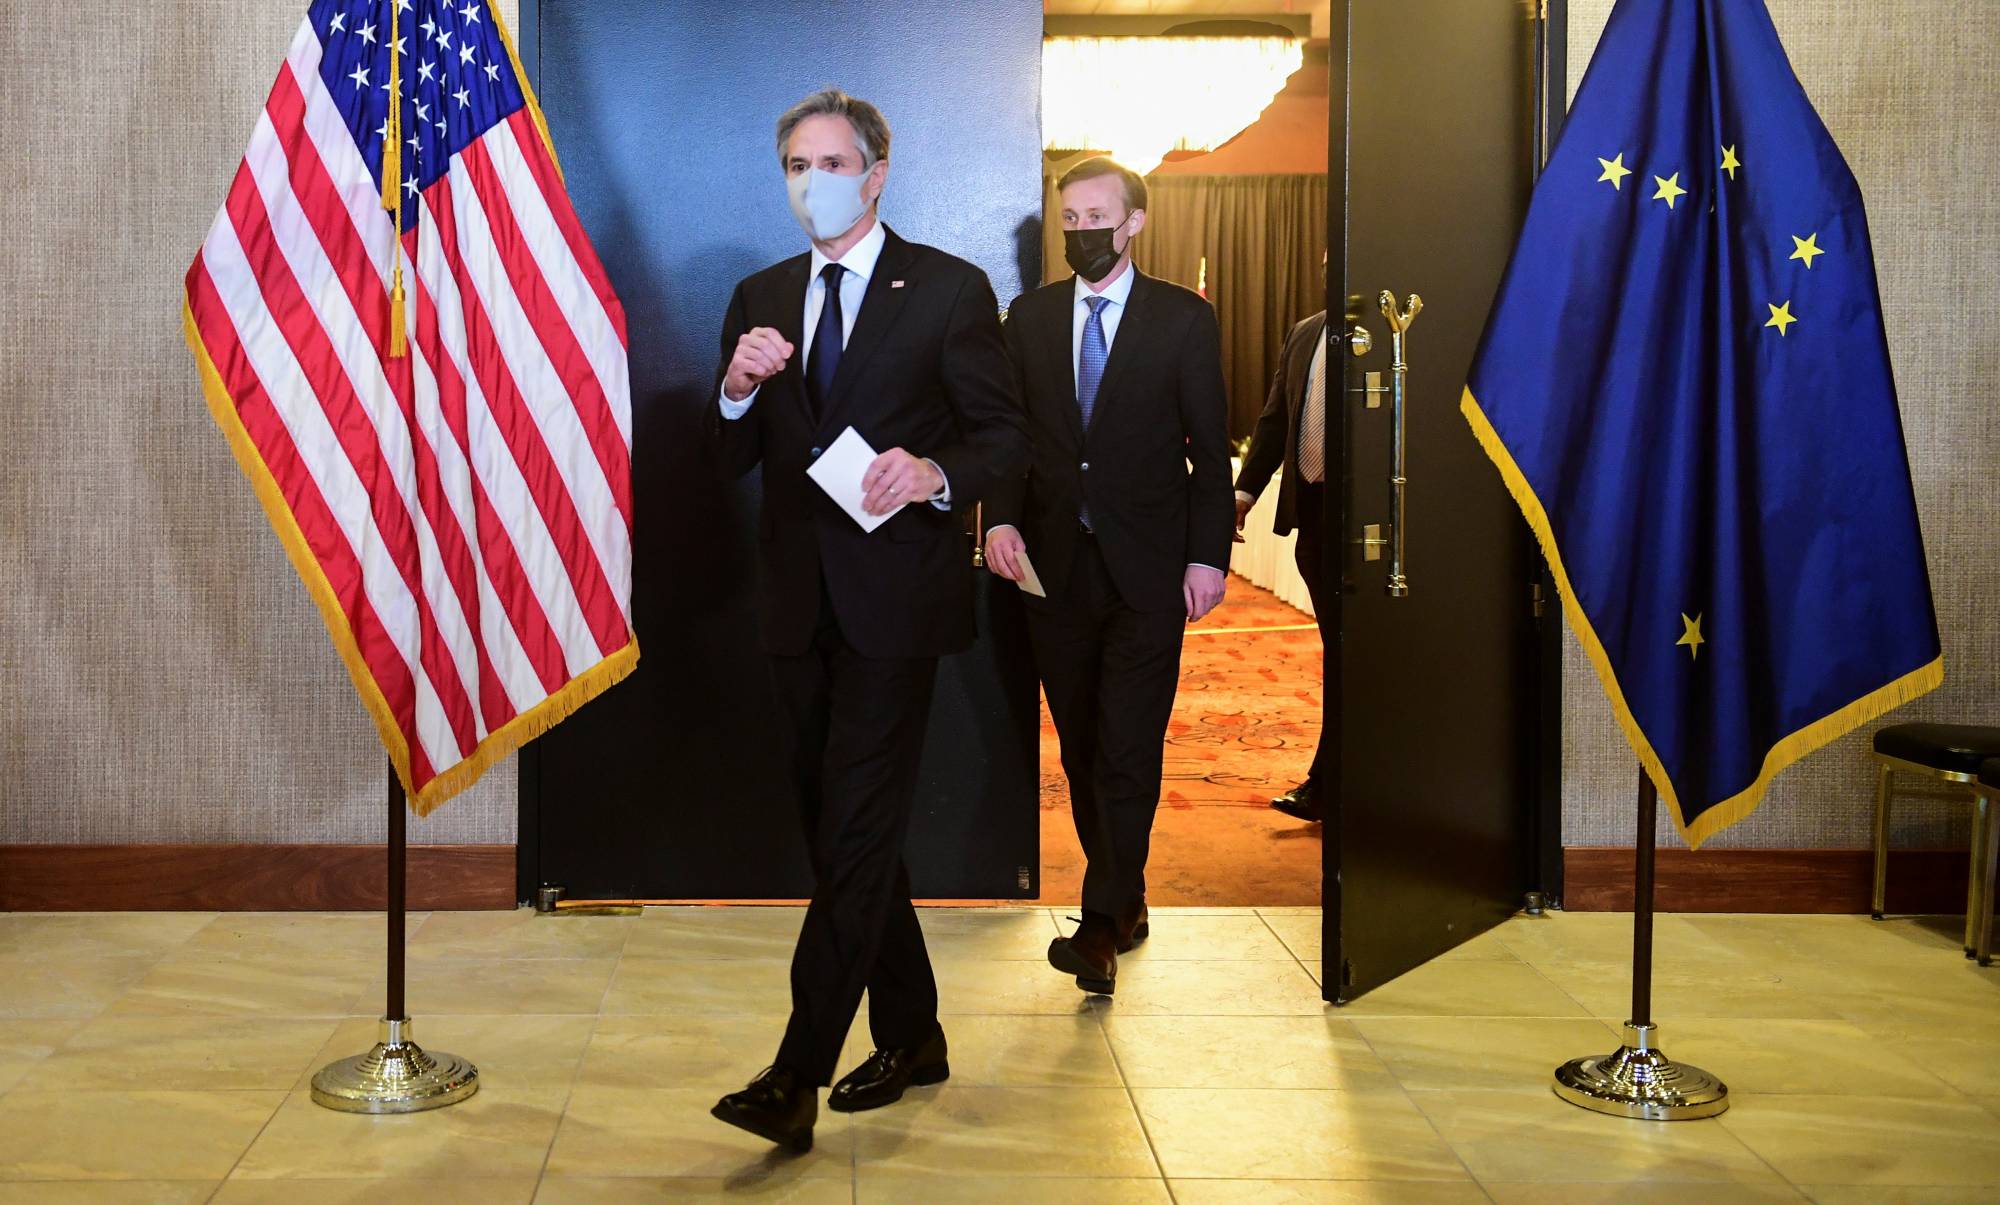 U.S. Secretary of State Antony Blinken and National Security Advisor Jake Sullivan exit from closed-door talks between the United States and China upon conclusion of a two-day meeting in Anchorage, Alaska, on Friday.   | POOL / VIA REUTERS